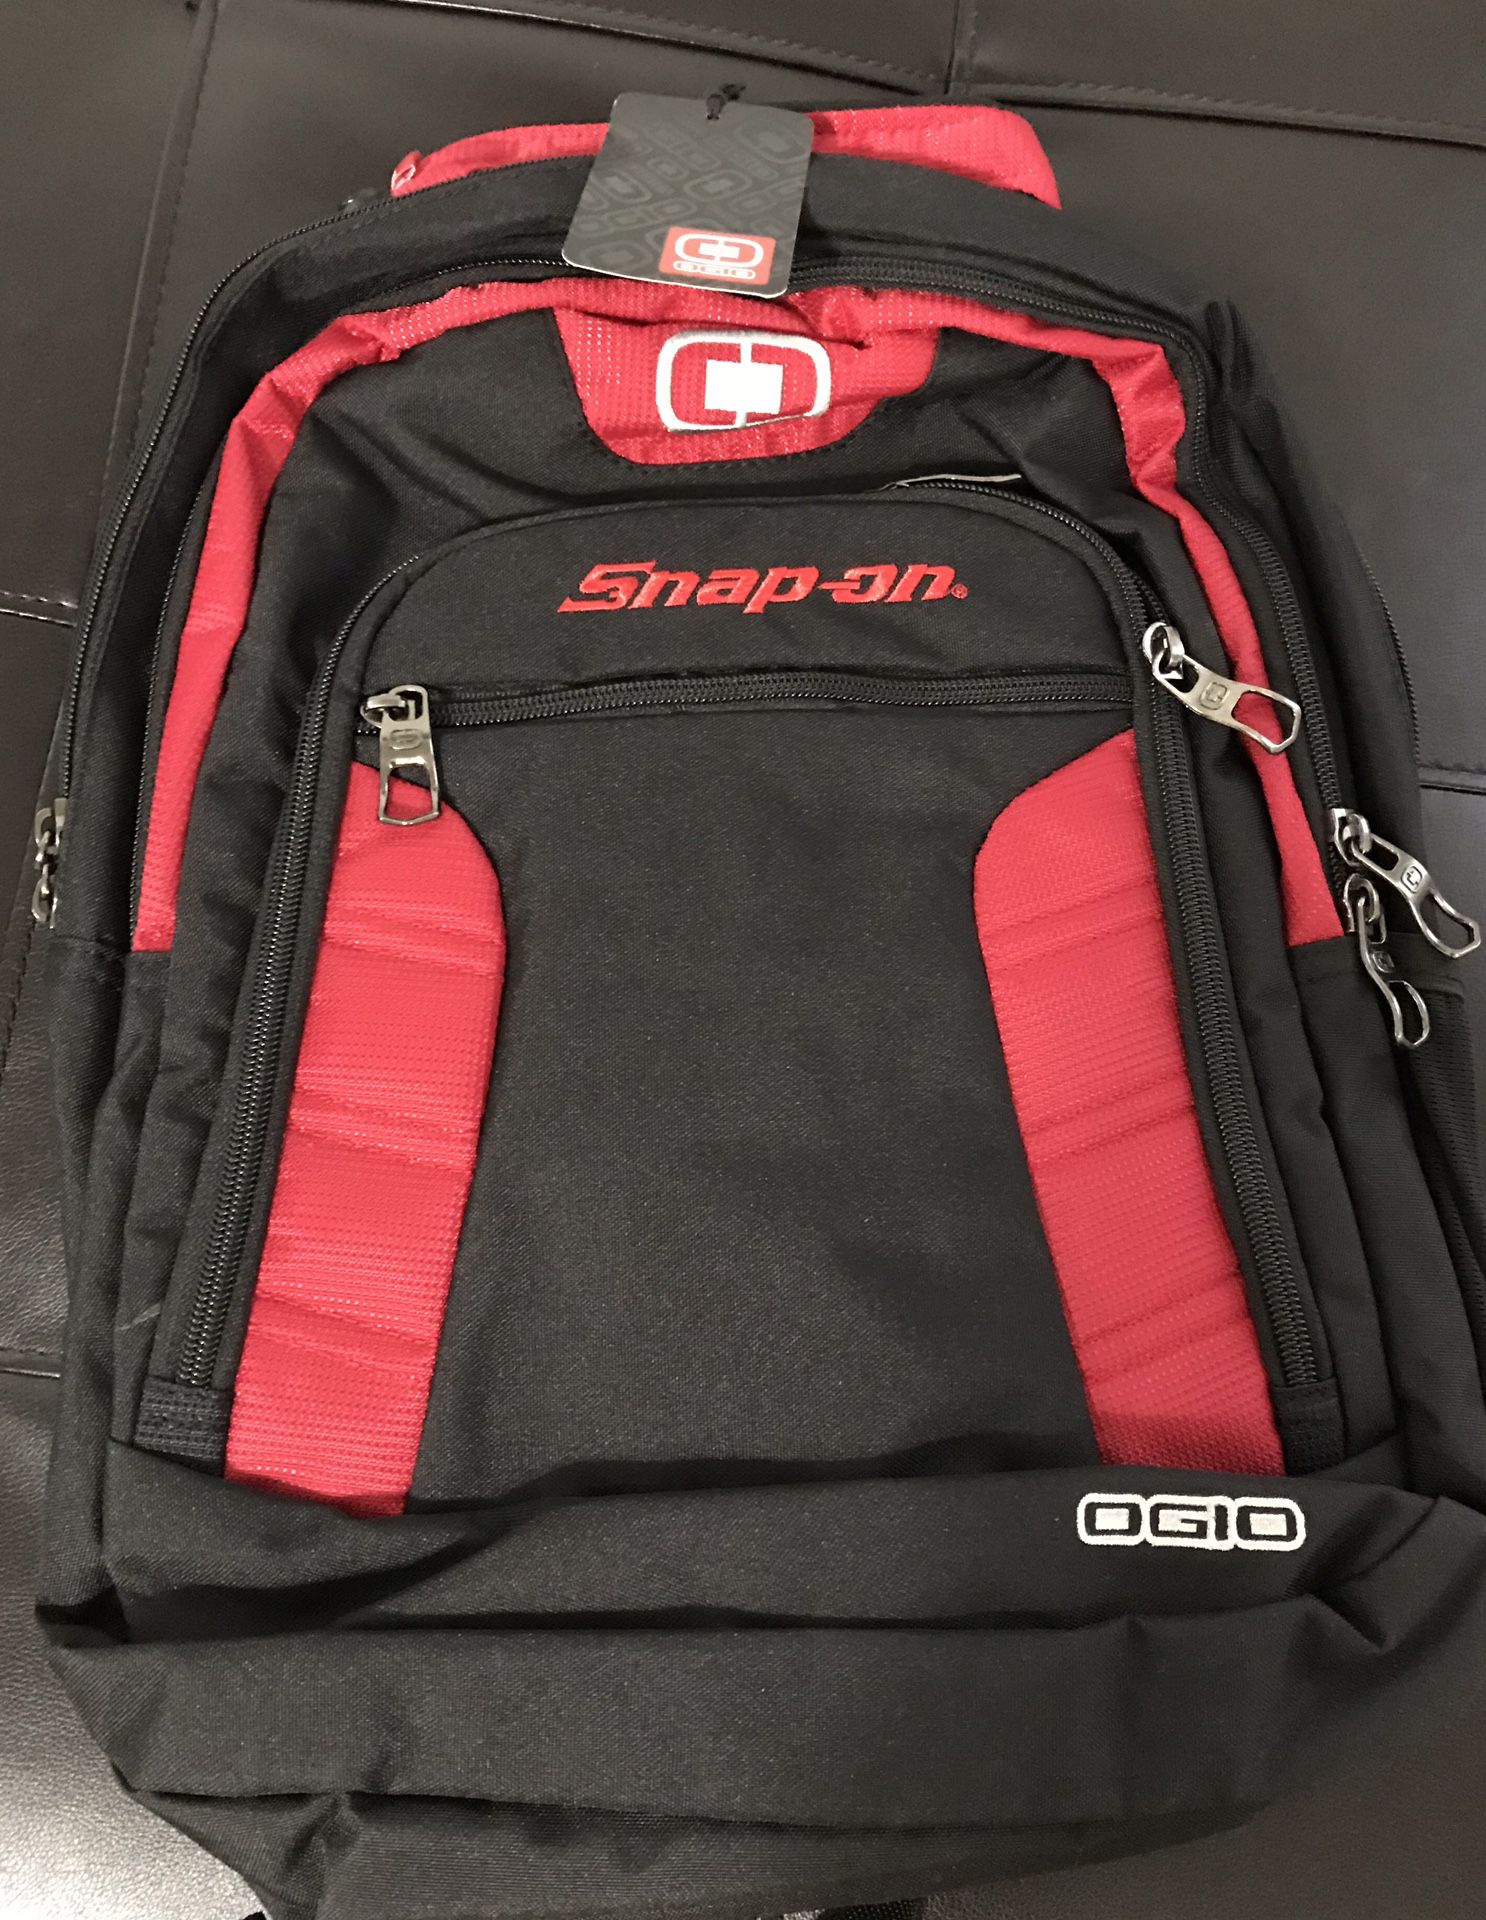 Snap on Ogio Backpack